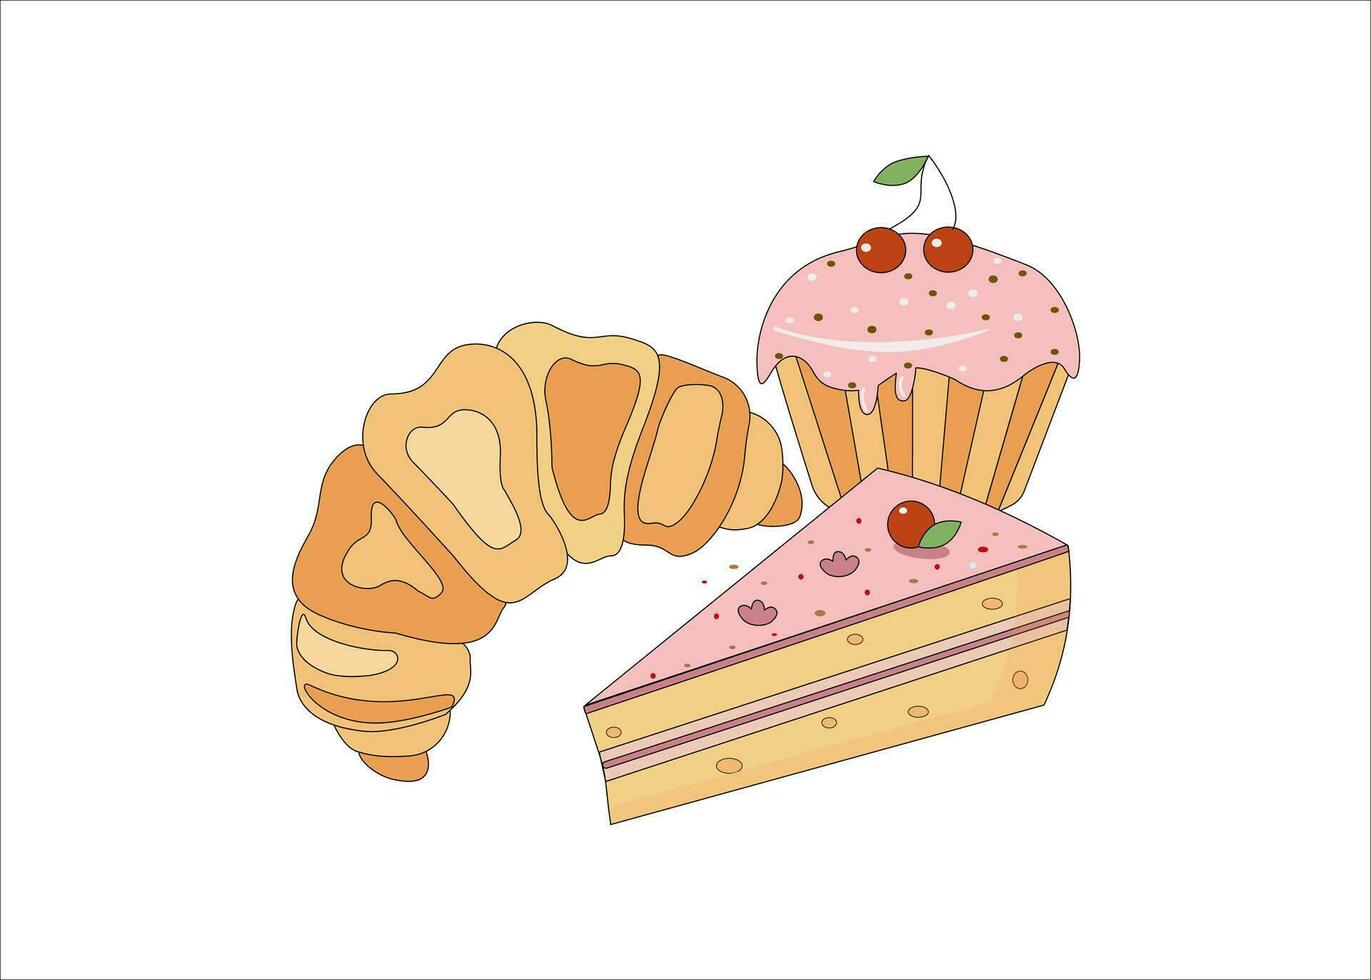 Cakes, croissant doodle. Sweets, dessert, pastries, confectionery. Vector graphics on an isolated background.